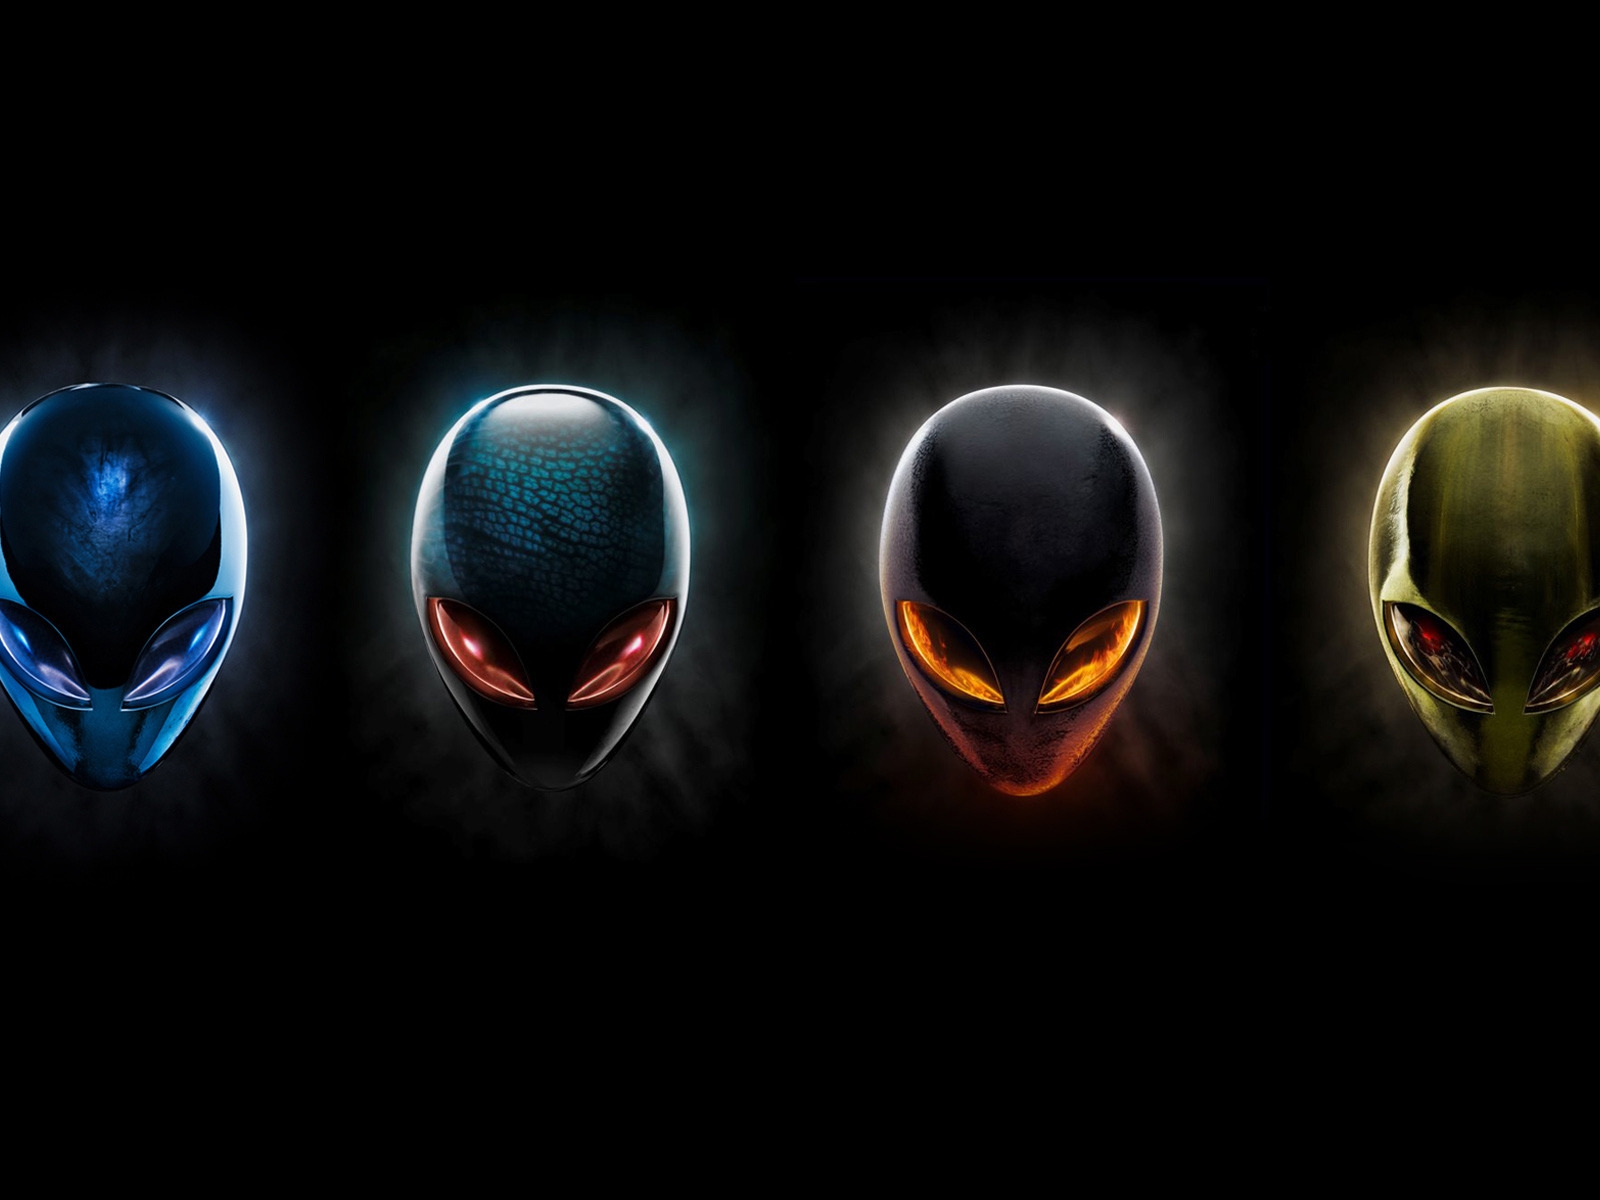 Alienware Logos for 1600 x 1200 resolution